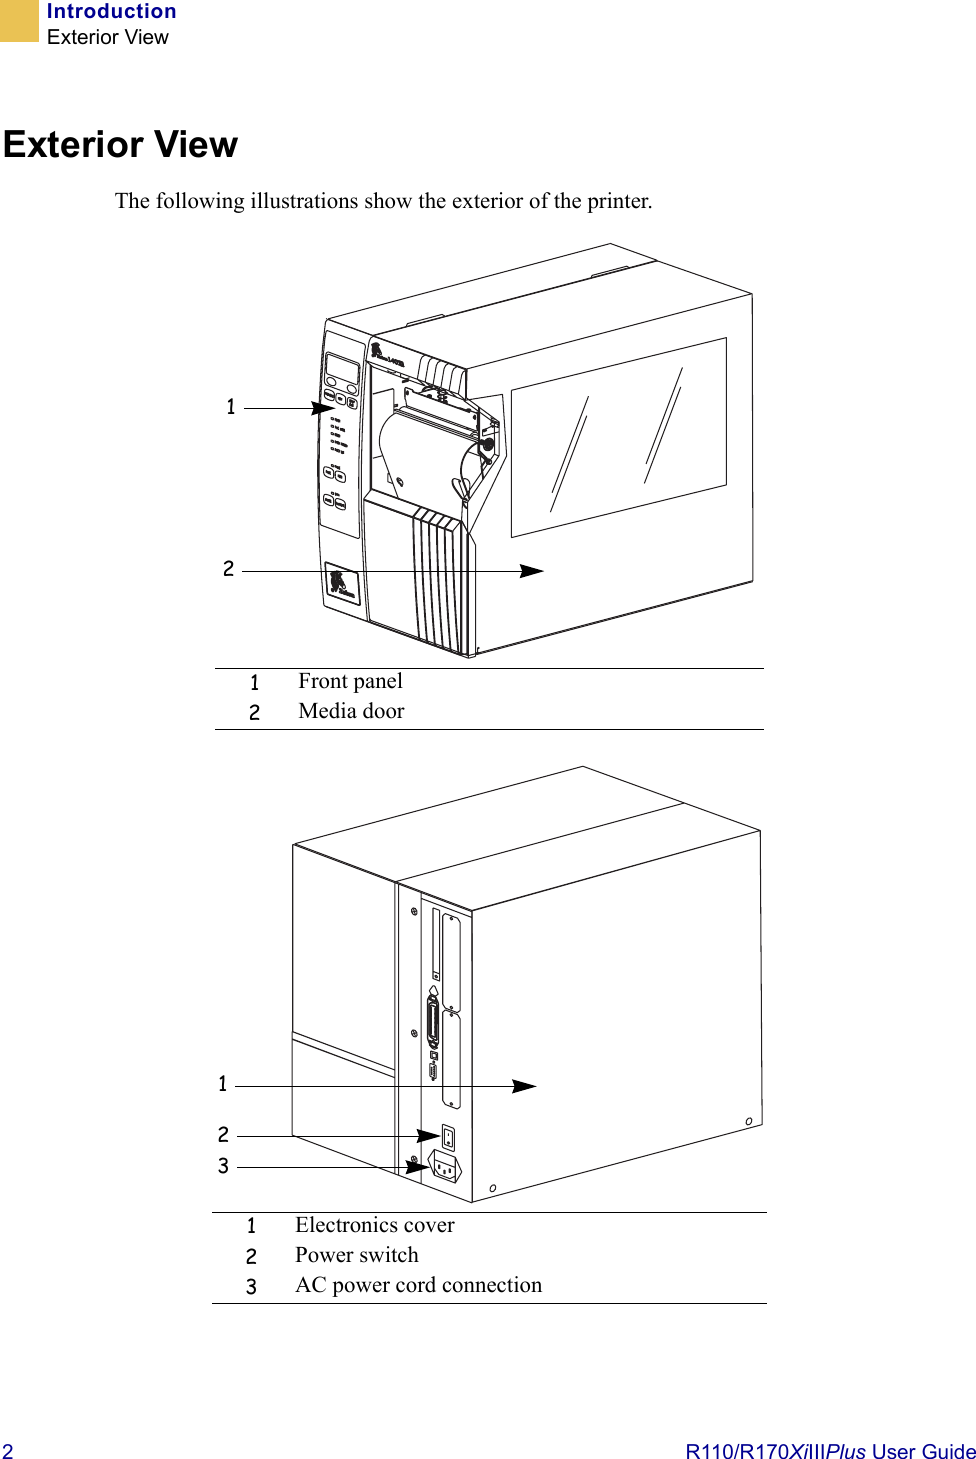 2  R110/R170XiIIIPlus User GuideIntroductionExterior ViewExterior ViewThe following illustrations show the exterior of the printer.1Front panel2Media door1Electronics cover2Power switch3AC power cord connection12213